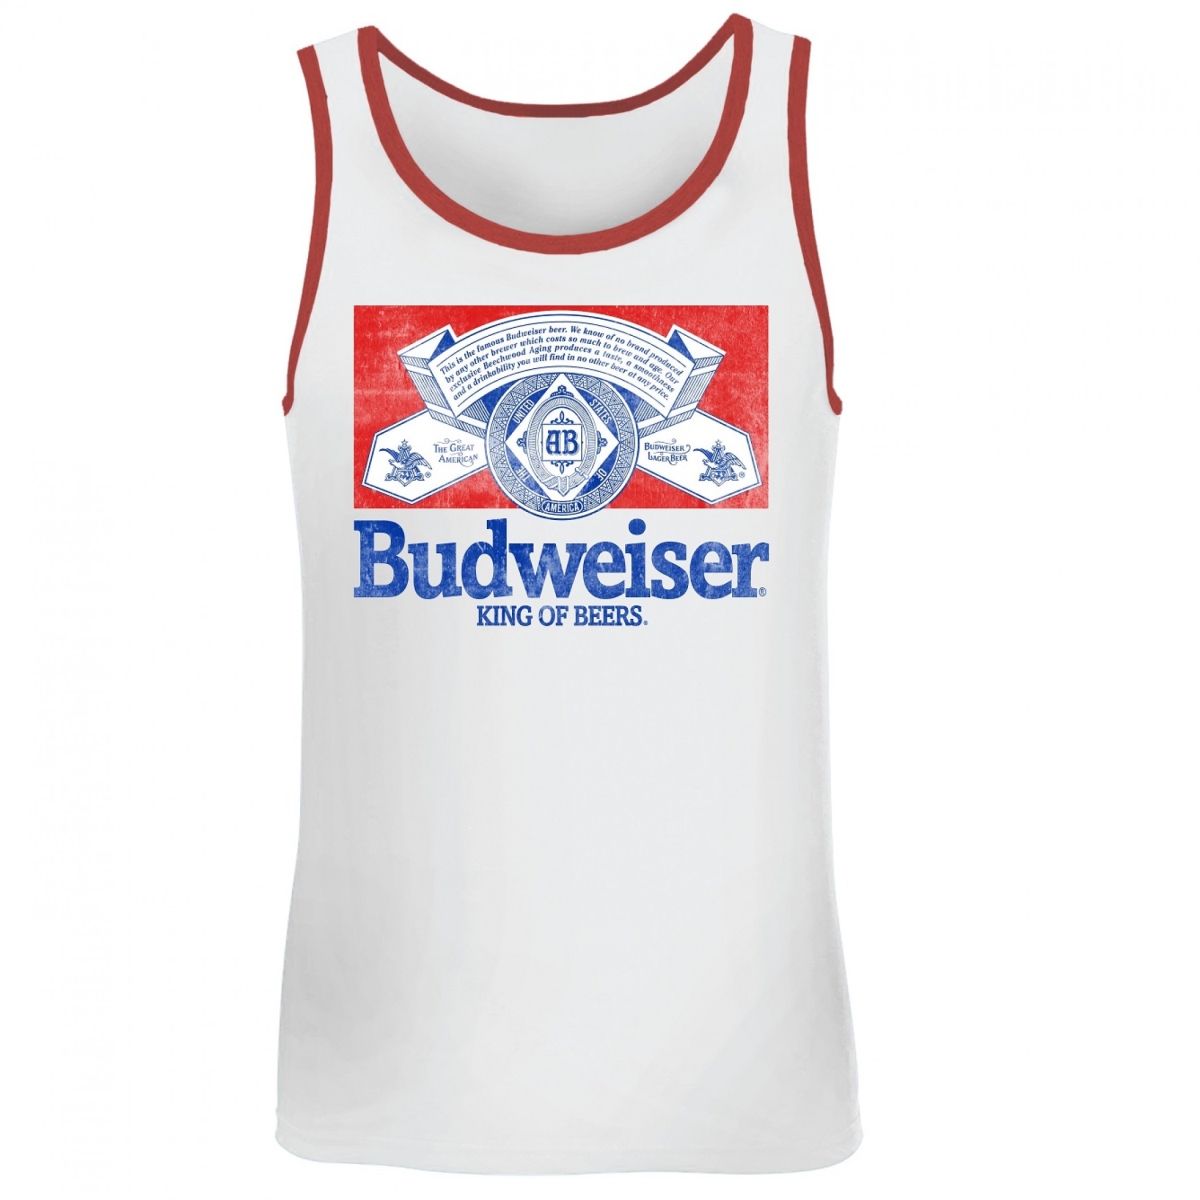 Budweiser 819959-small Mens King of Beers Red Trim Tank Top, White - Small